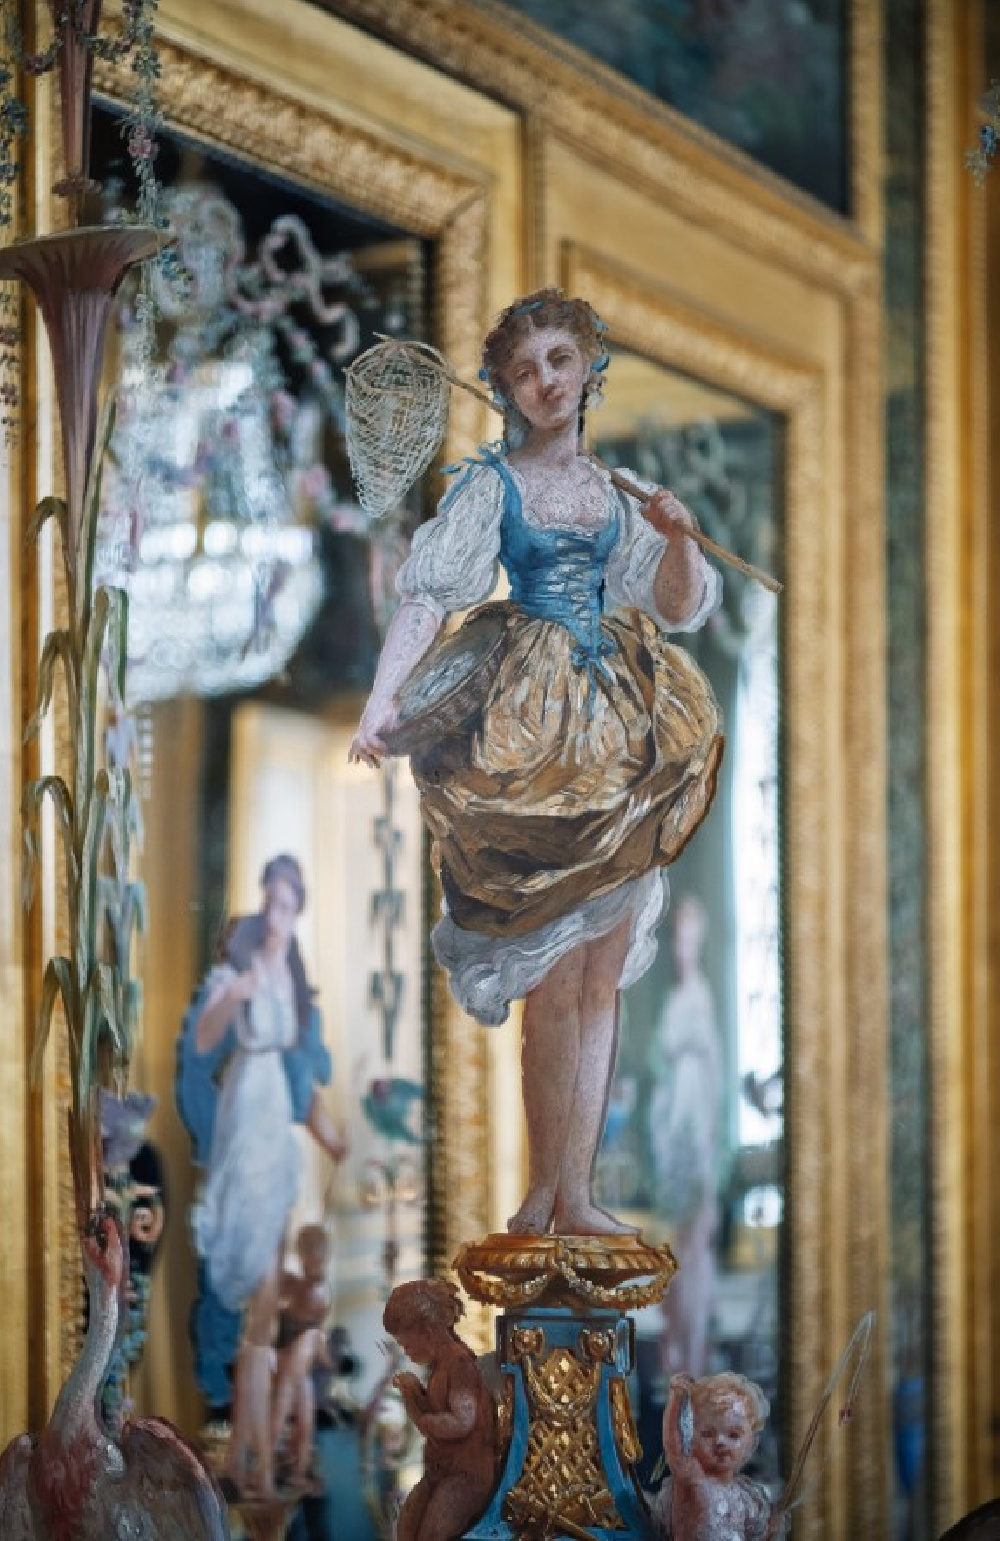 Painting on glass by Chaplin in Mirror Room of Élysée Palace. Photo by Ambroise Tézenas from Presidential Residences in France (Flammarion 2021)